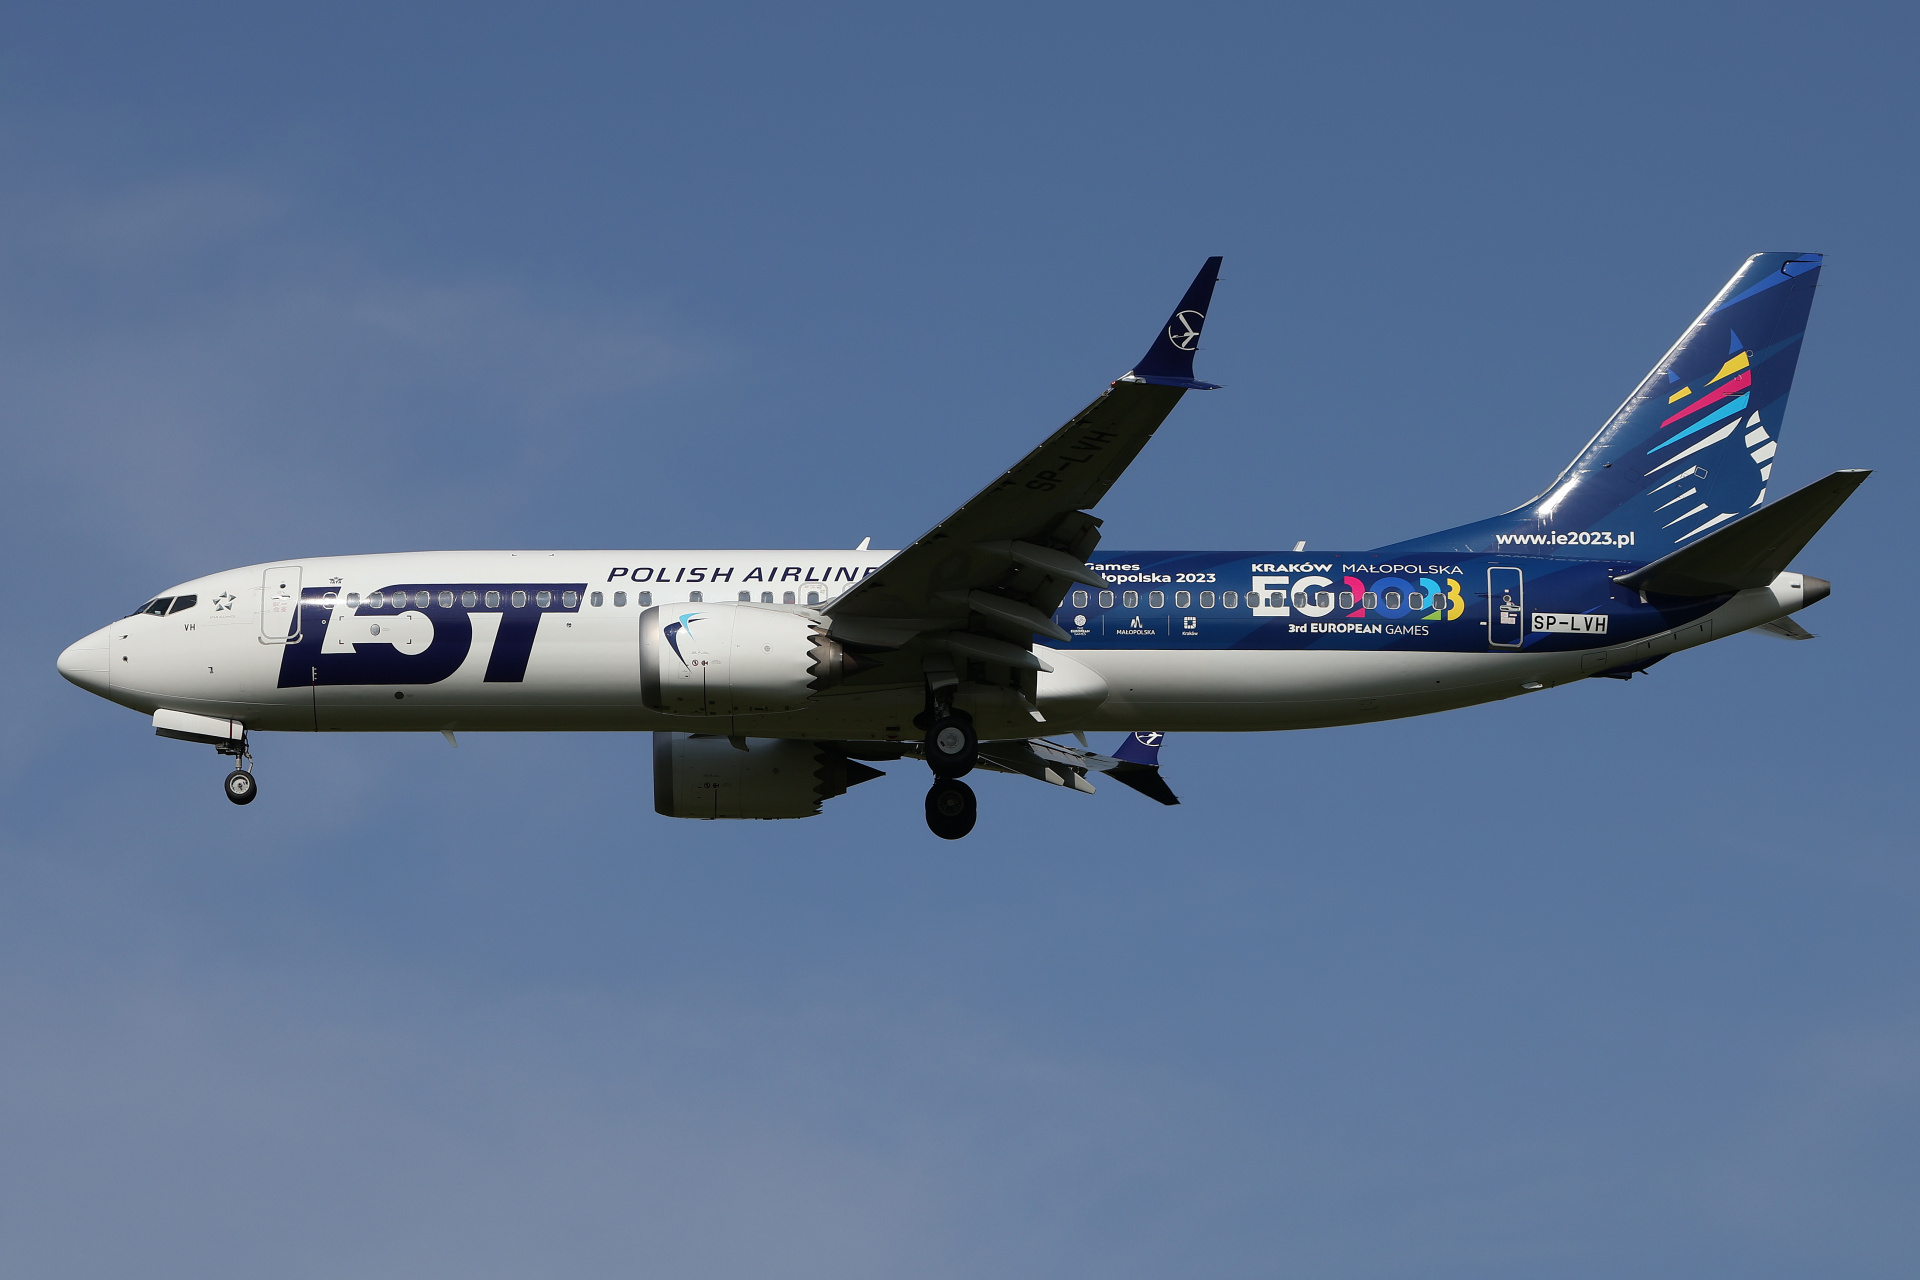 SP-LVH (3rd European Games 2023 livery) (Aircraft » EPWA Spotting » Boeing 737-8 MAX » LOT Polish Airlines)